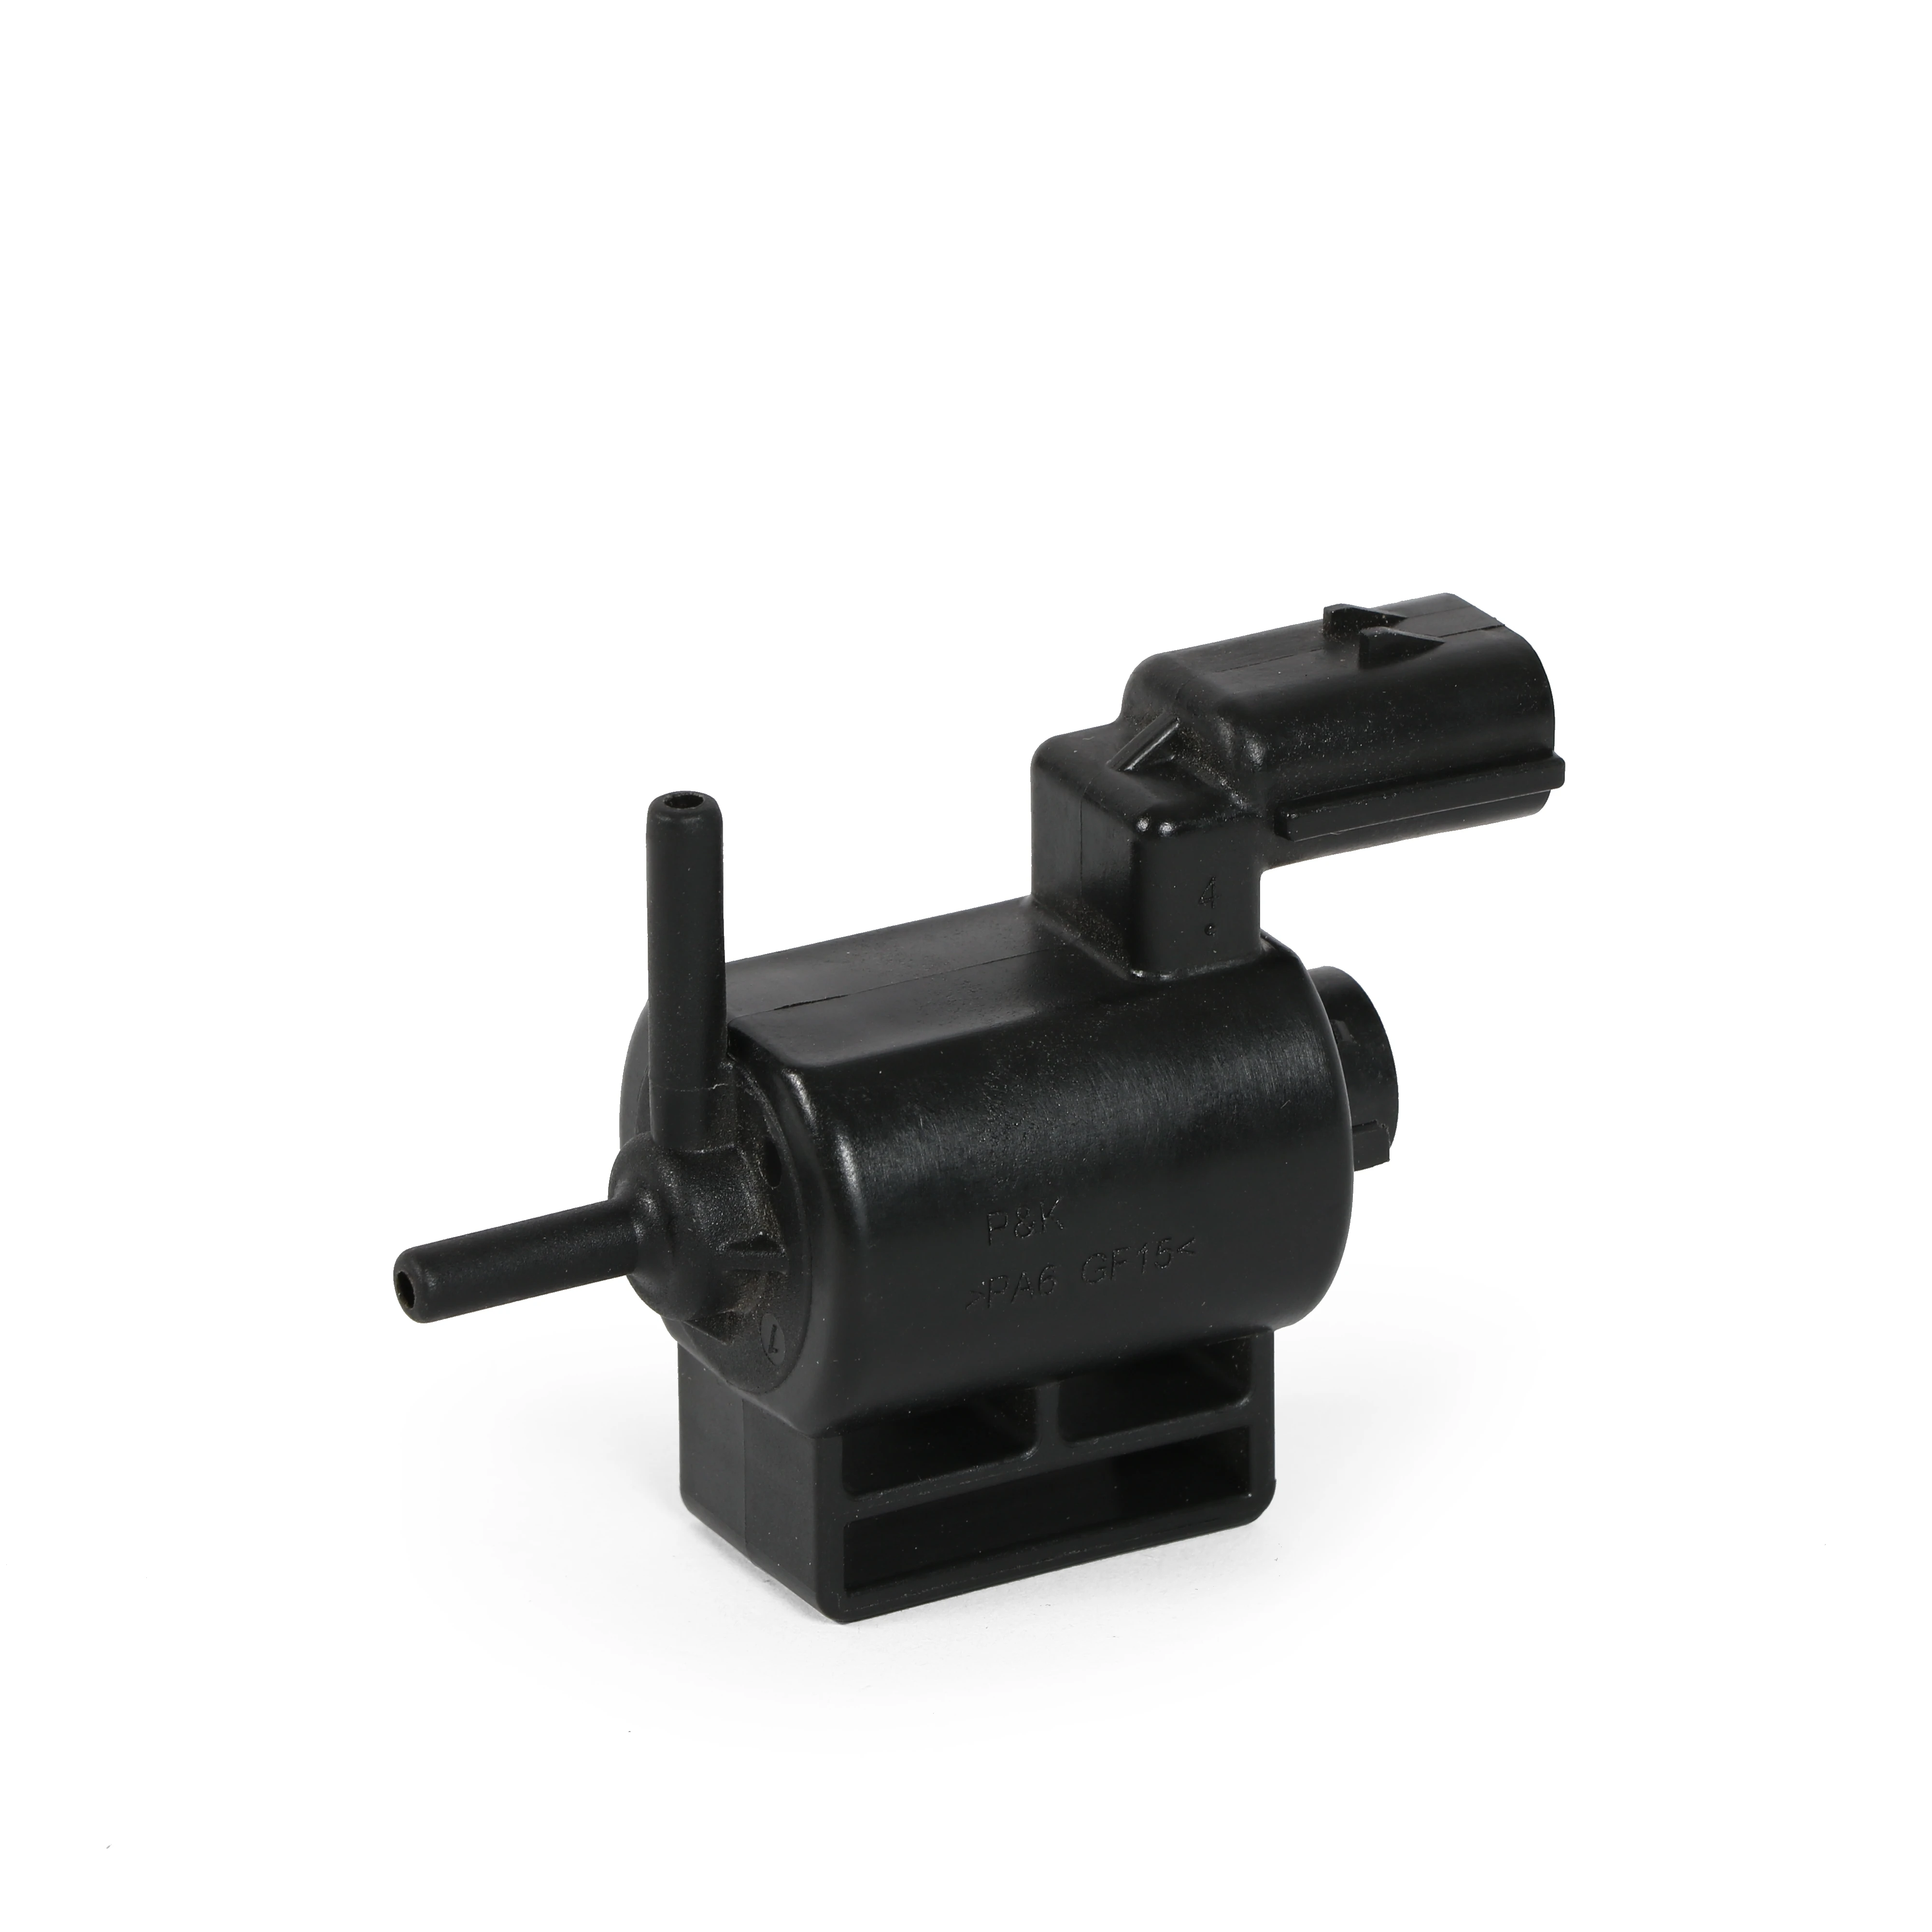 High precision valve made by plastic insert injection molding process with metal insert for car